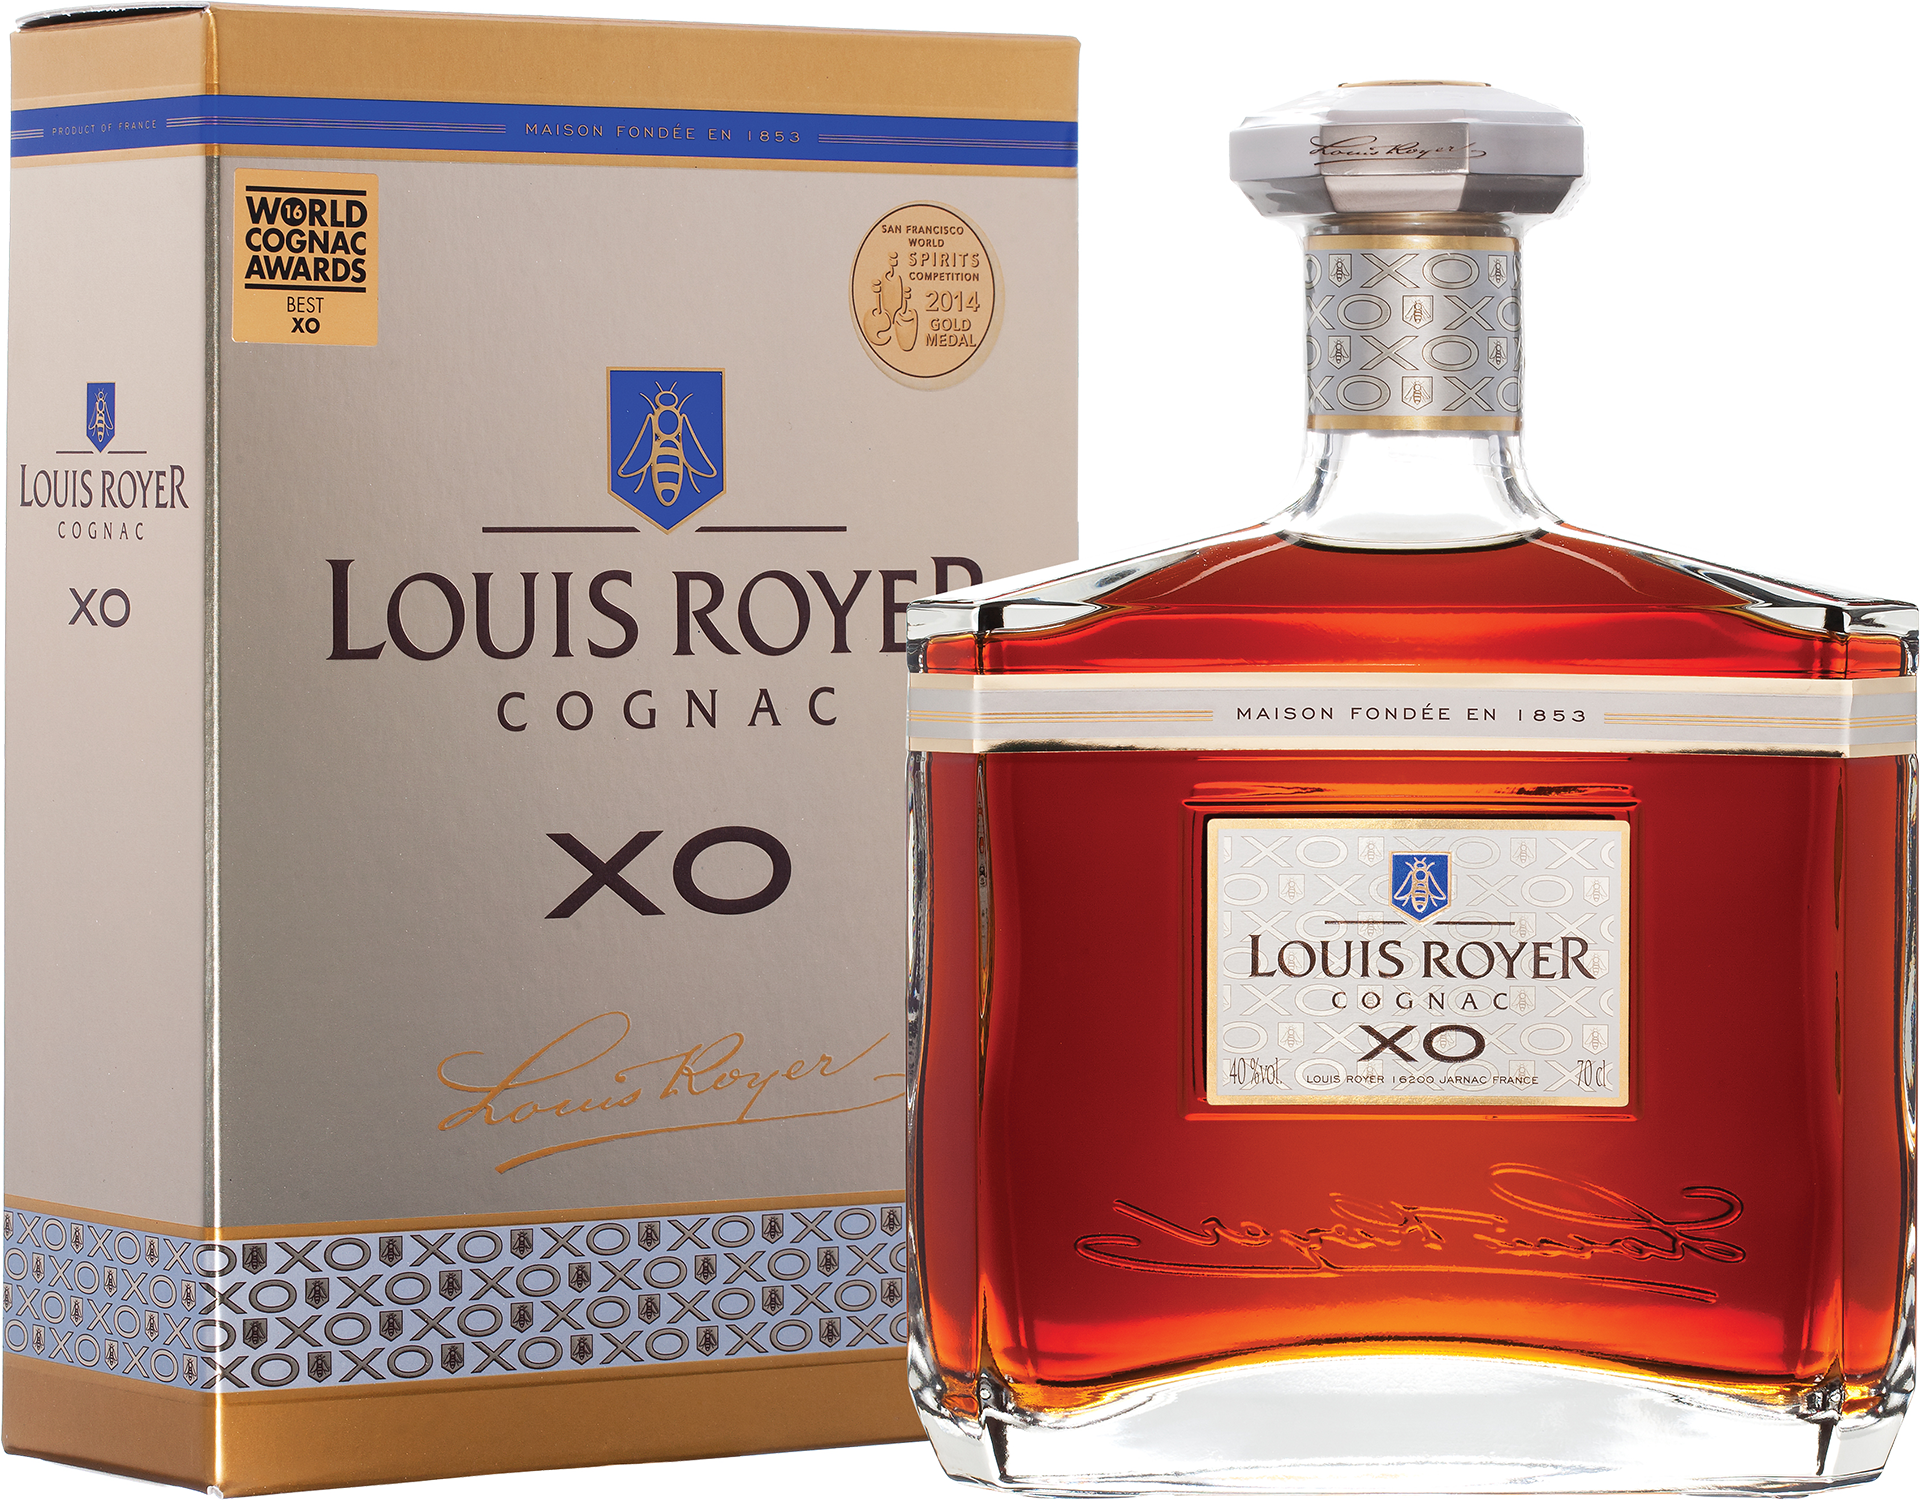 louis royer cognac grande champagne extra gift box Louis Royer Cognac XO (gift box)